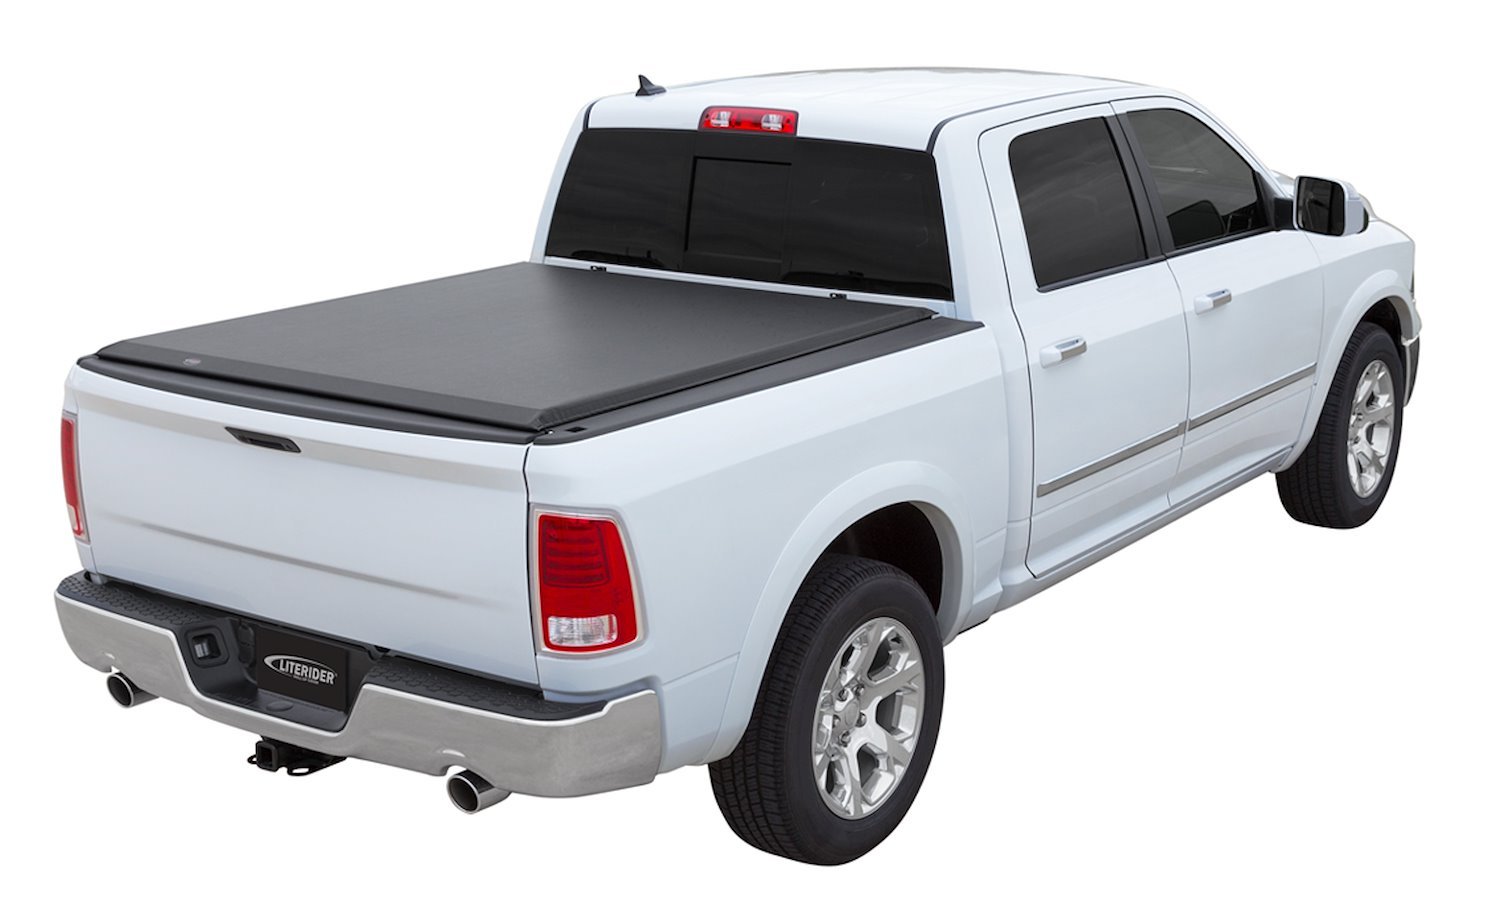 LITERIDER Roll-Up Tonneau Cover, Fits Select Ram 1500/Classic, with 5 ft. 7 in. Bed w/RamBed